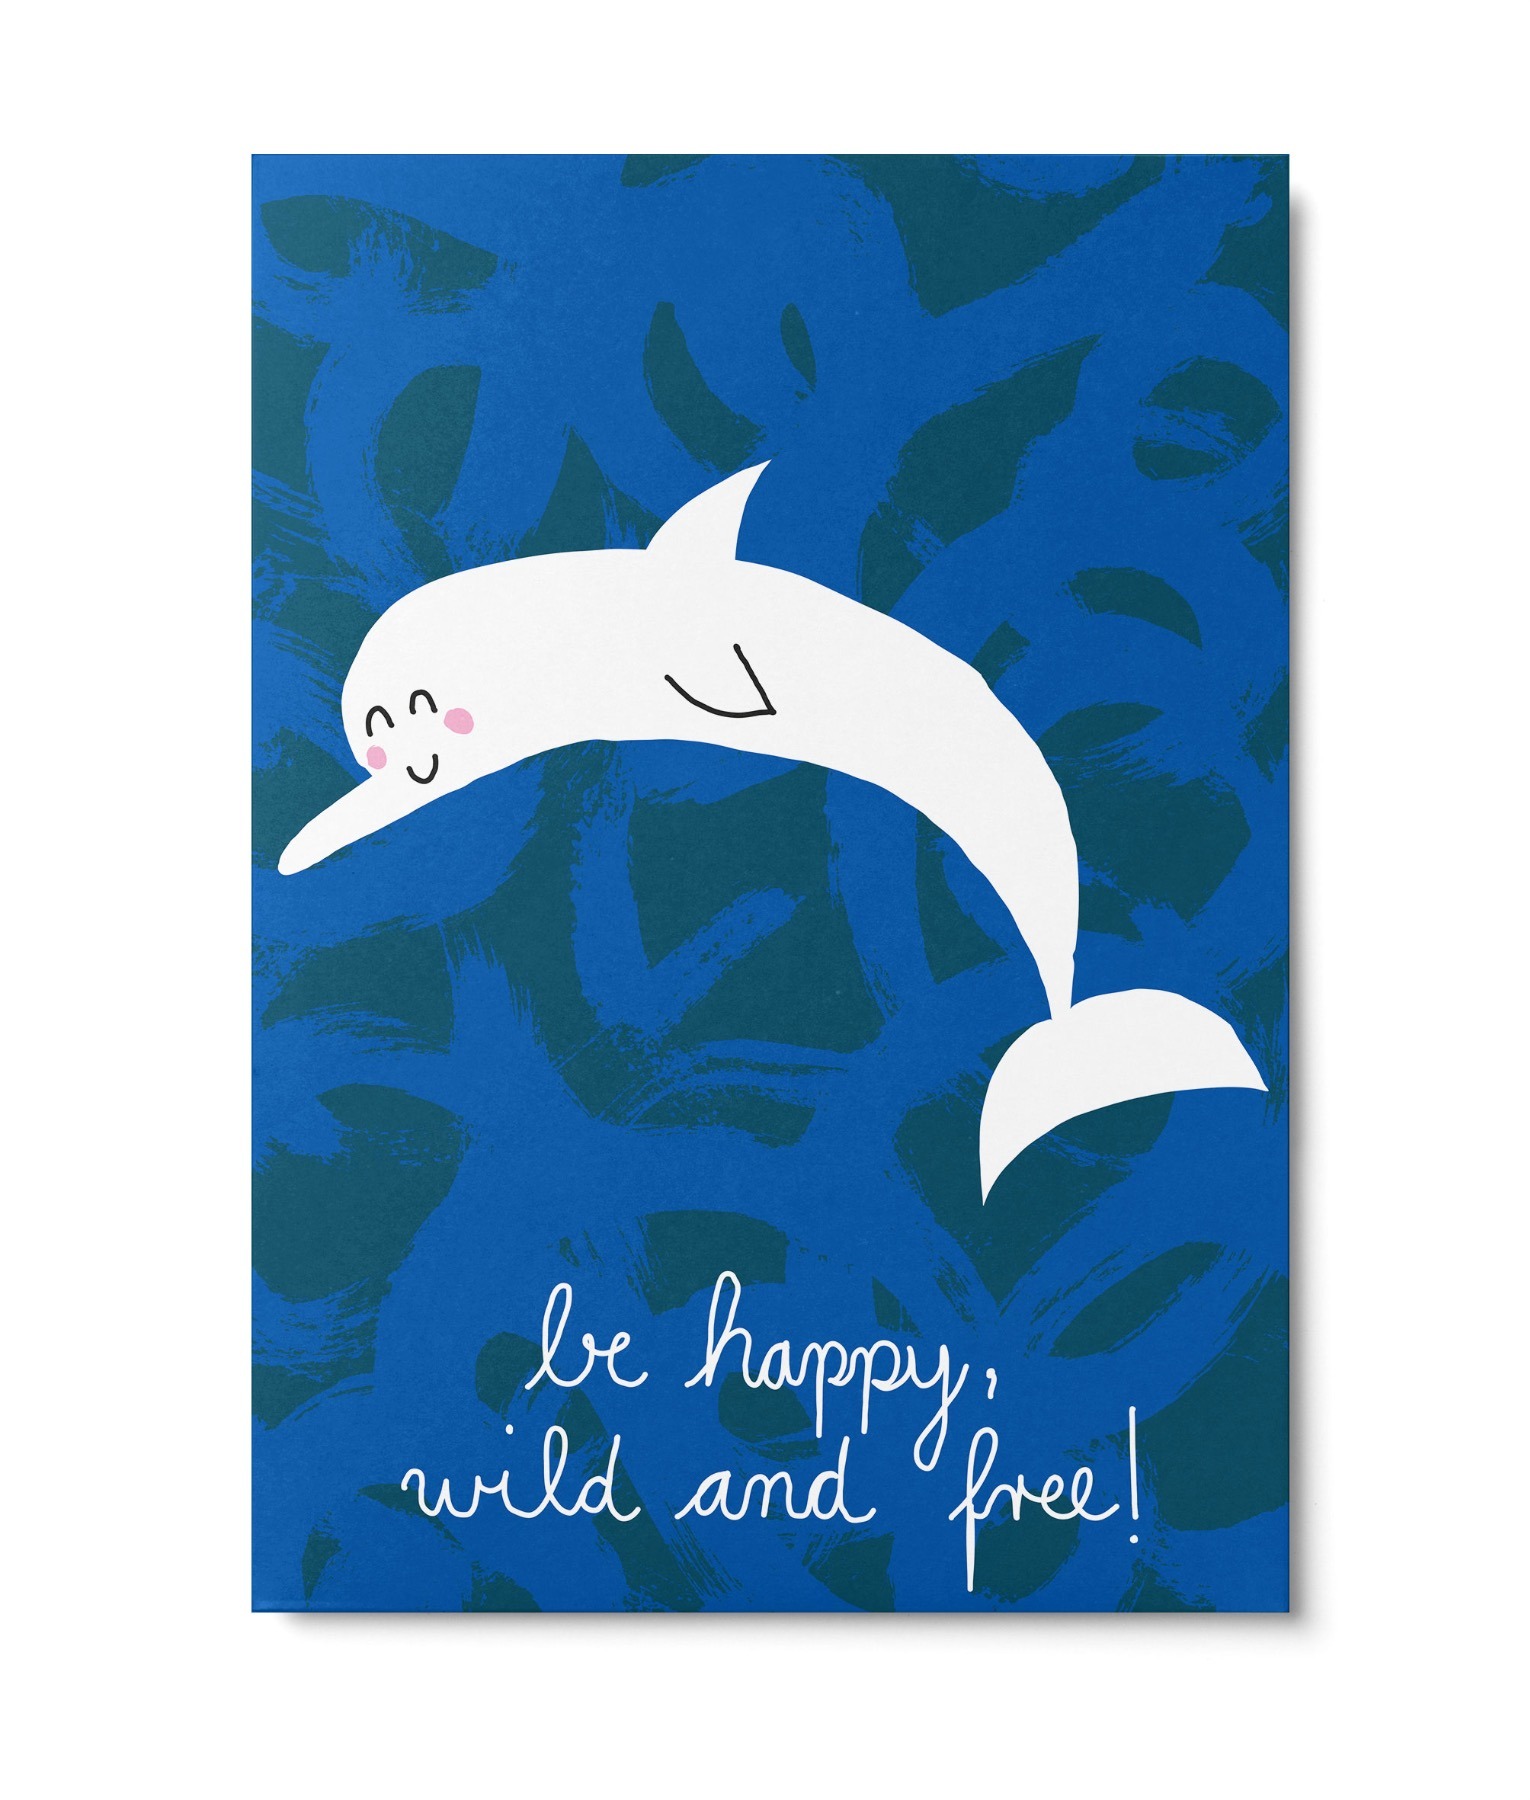 be happy wild and free